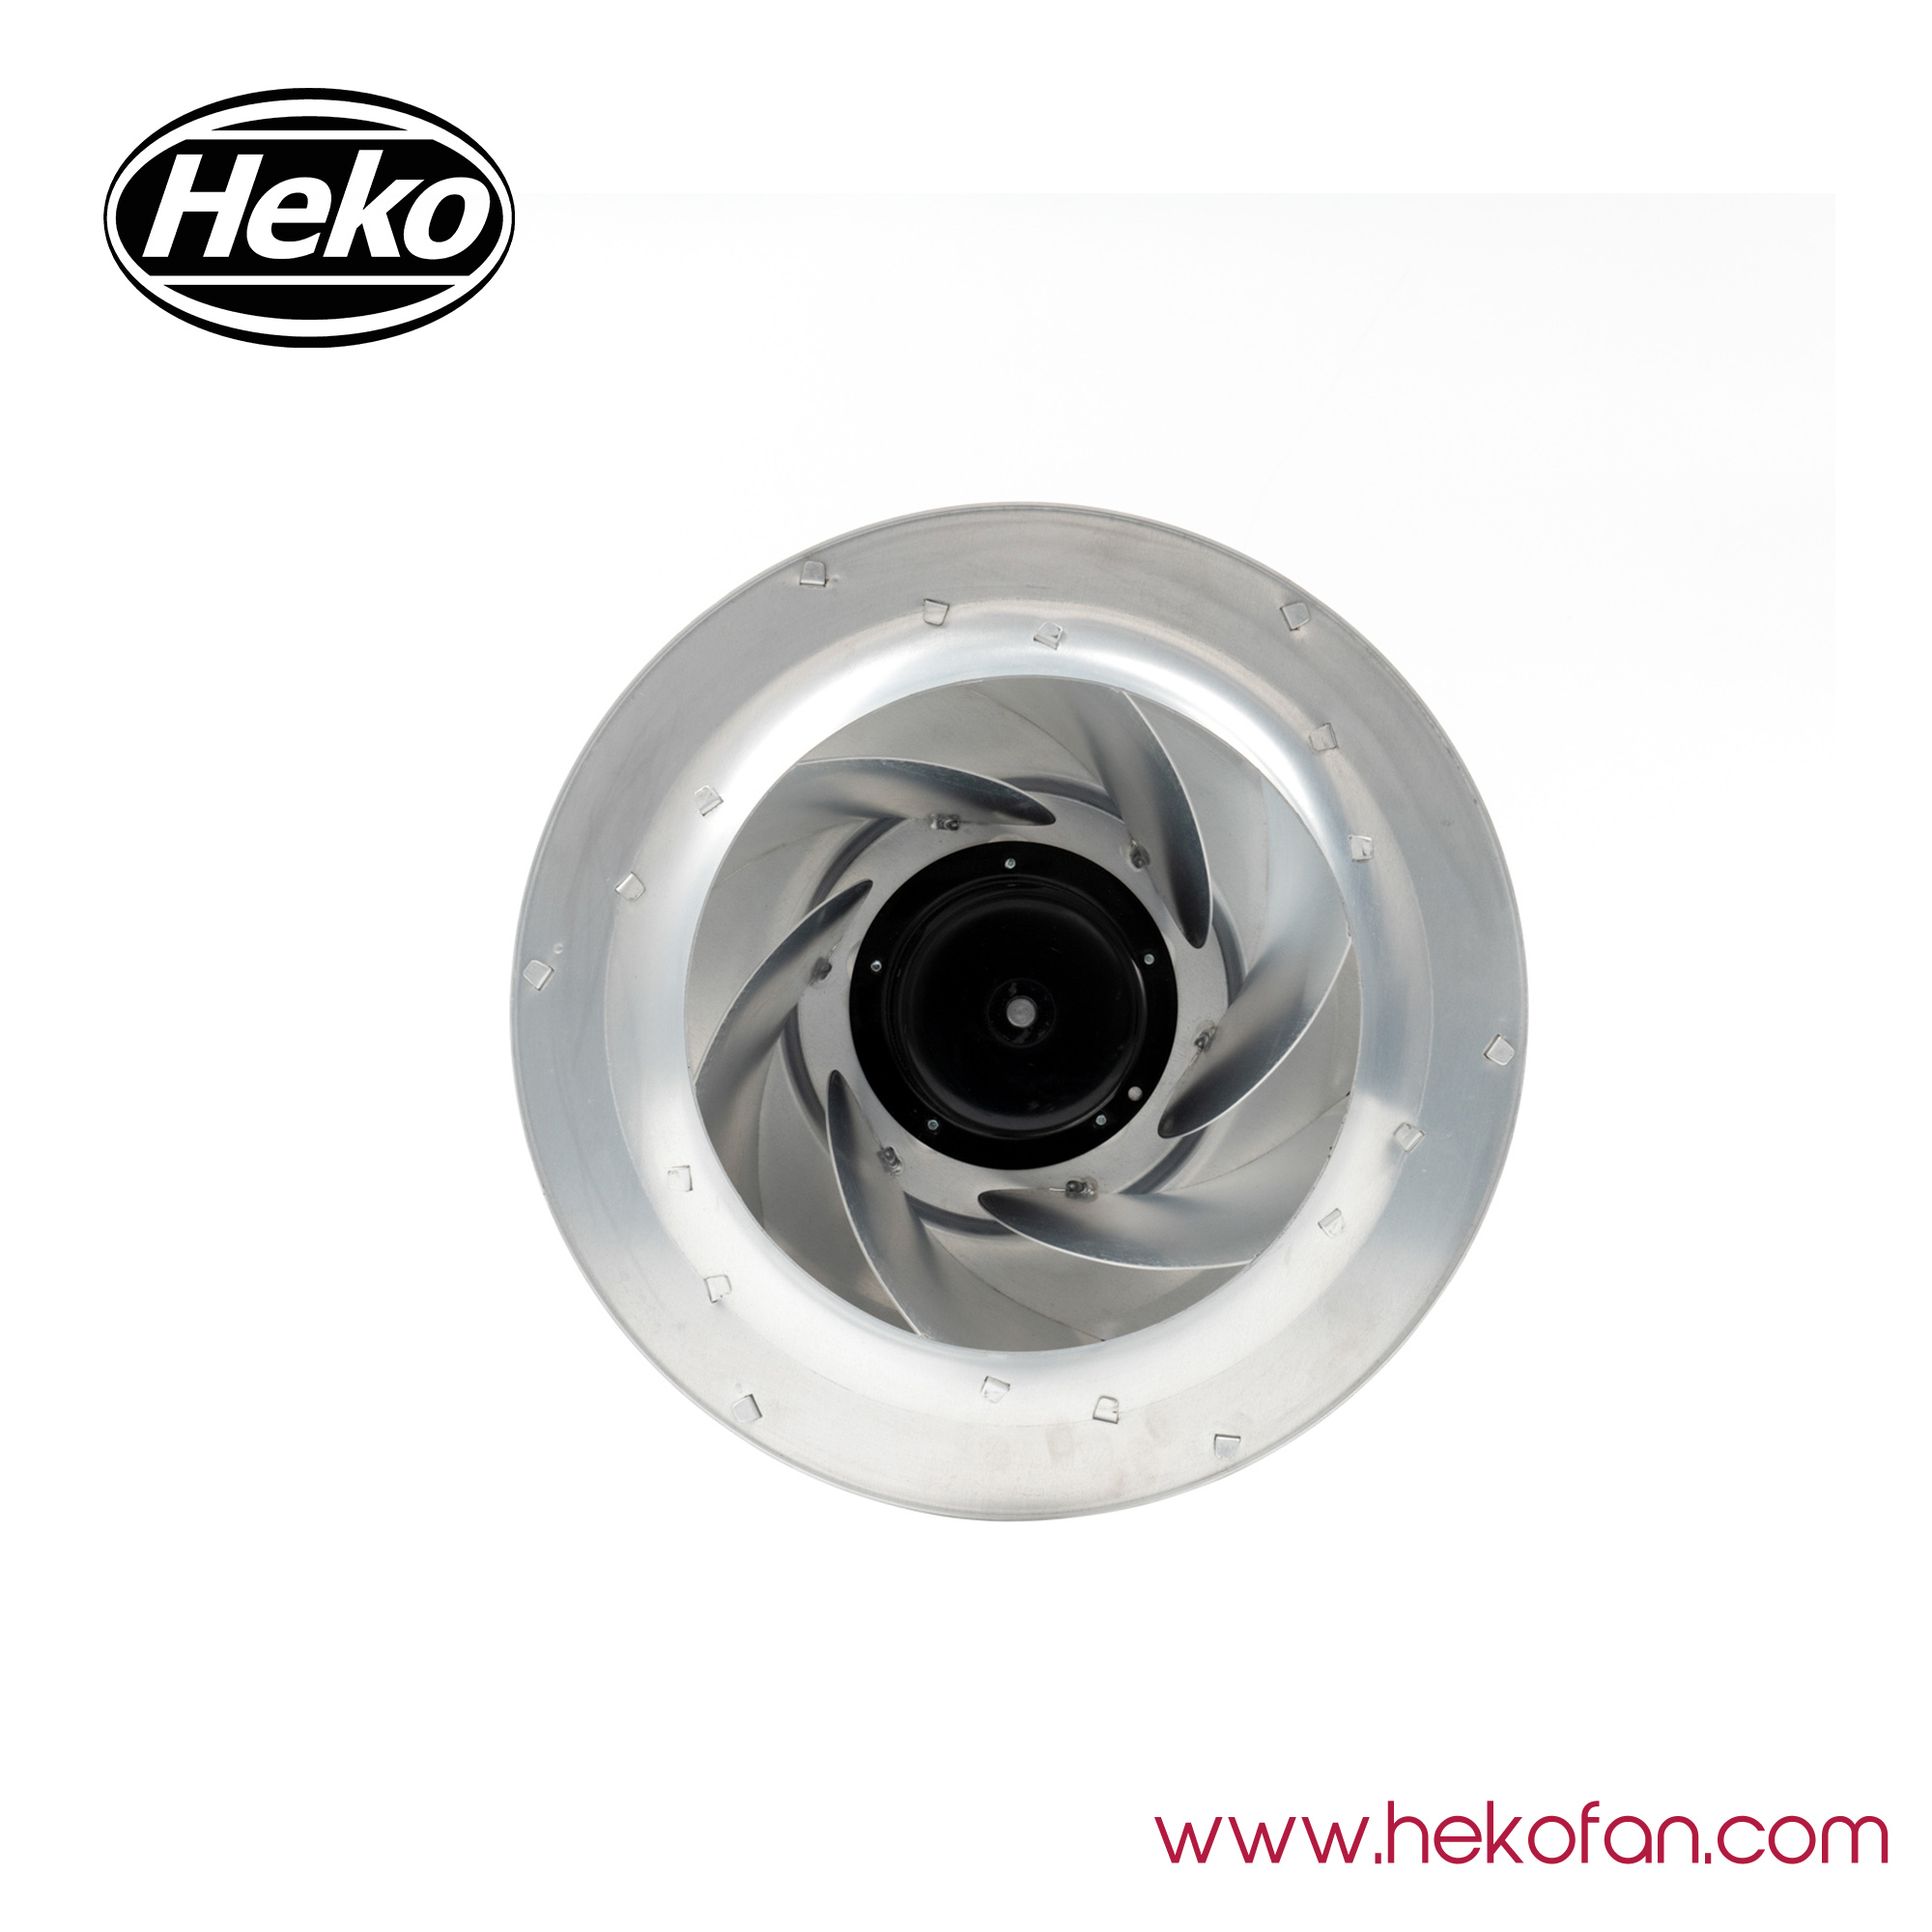 HEKO DC400mm Cabinet Centrifugal Extractor Fan